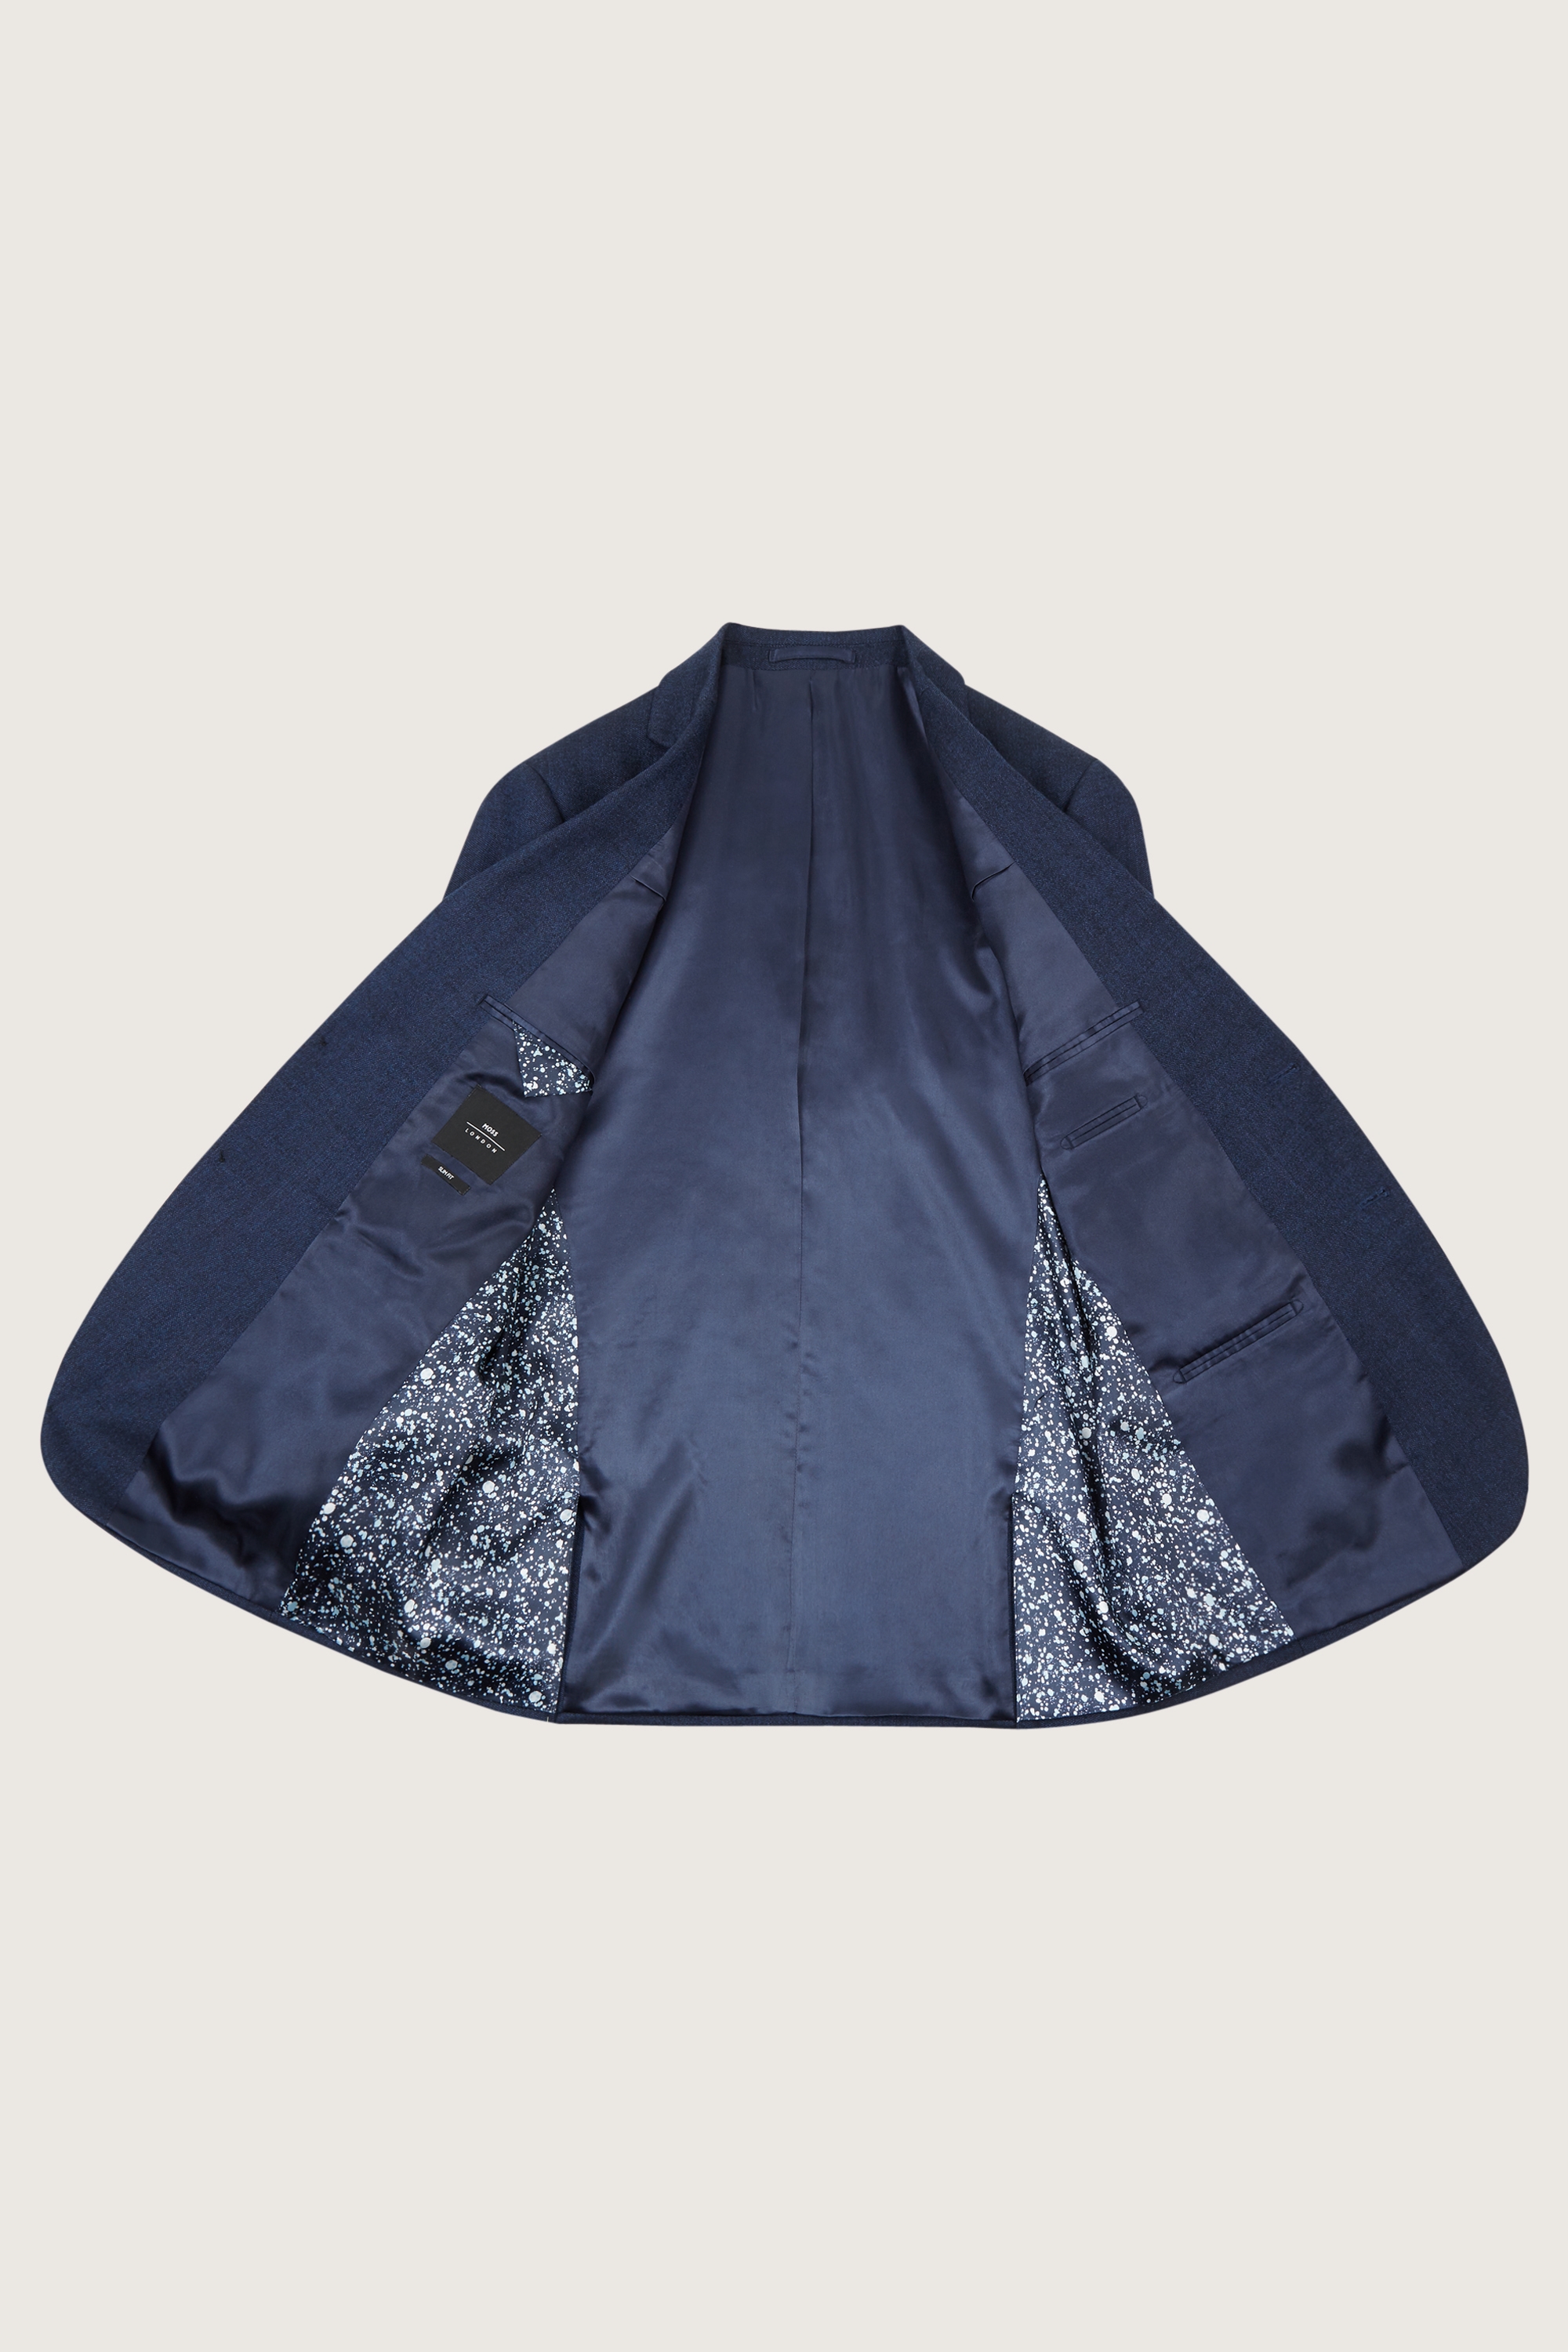 Slim Fit Blue Twisted Jacket | Buy Online at Moss